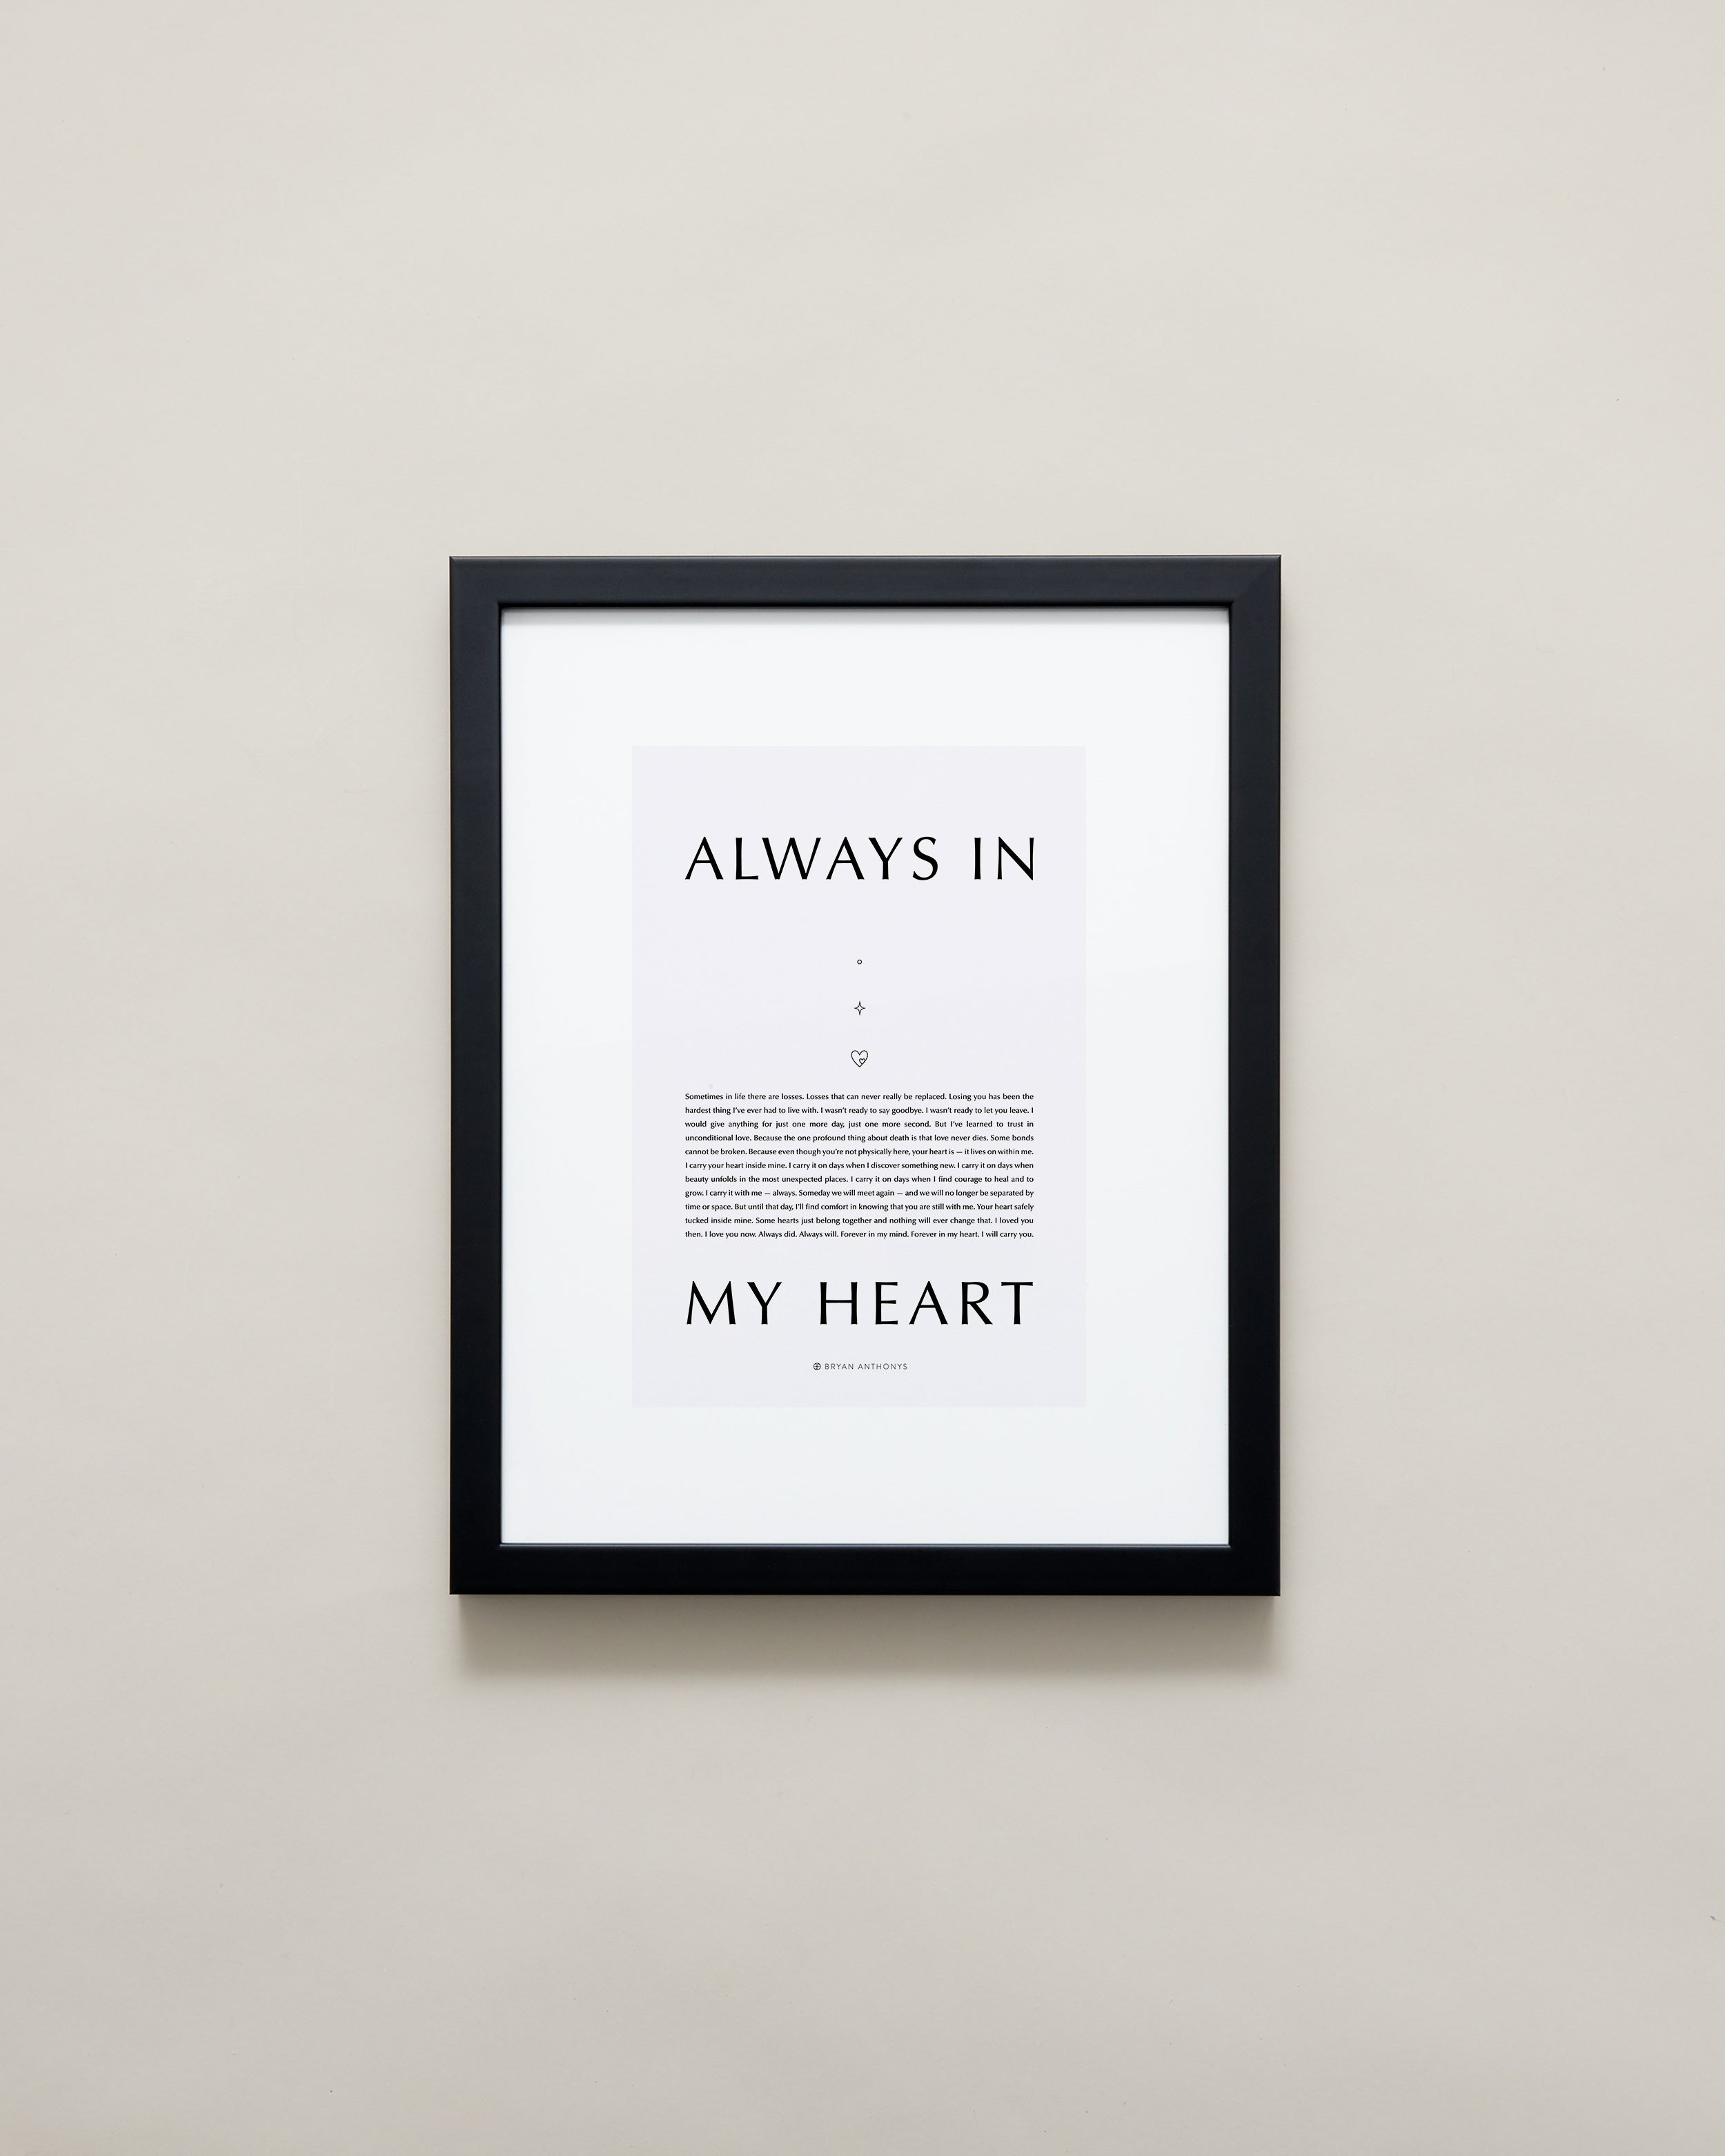 Bryan Anthonys Home Decor Purposeful Prints Always In My Heart Iconic Framed Print Gray Art With Black Frame 11x14